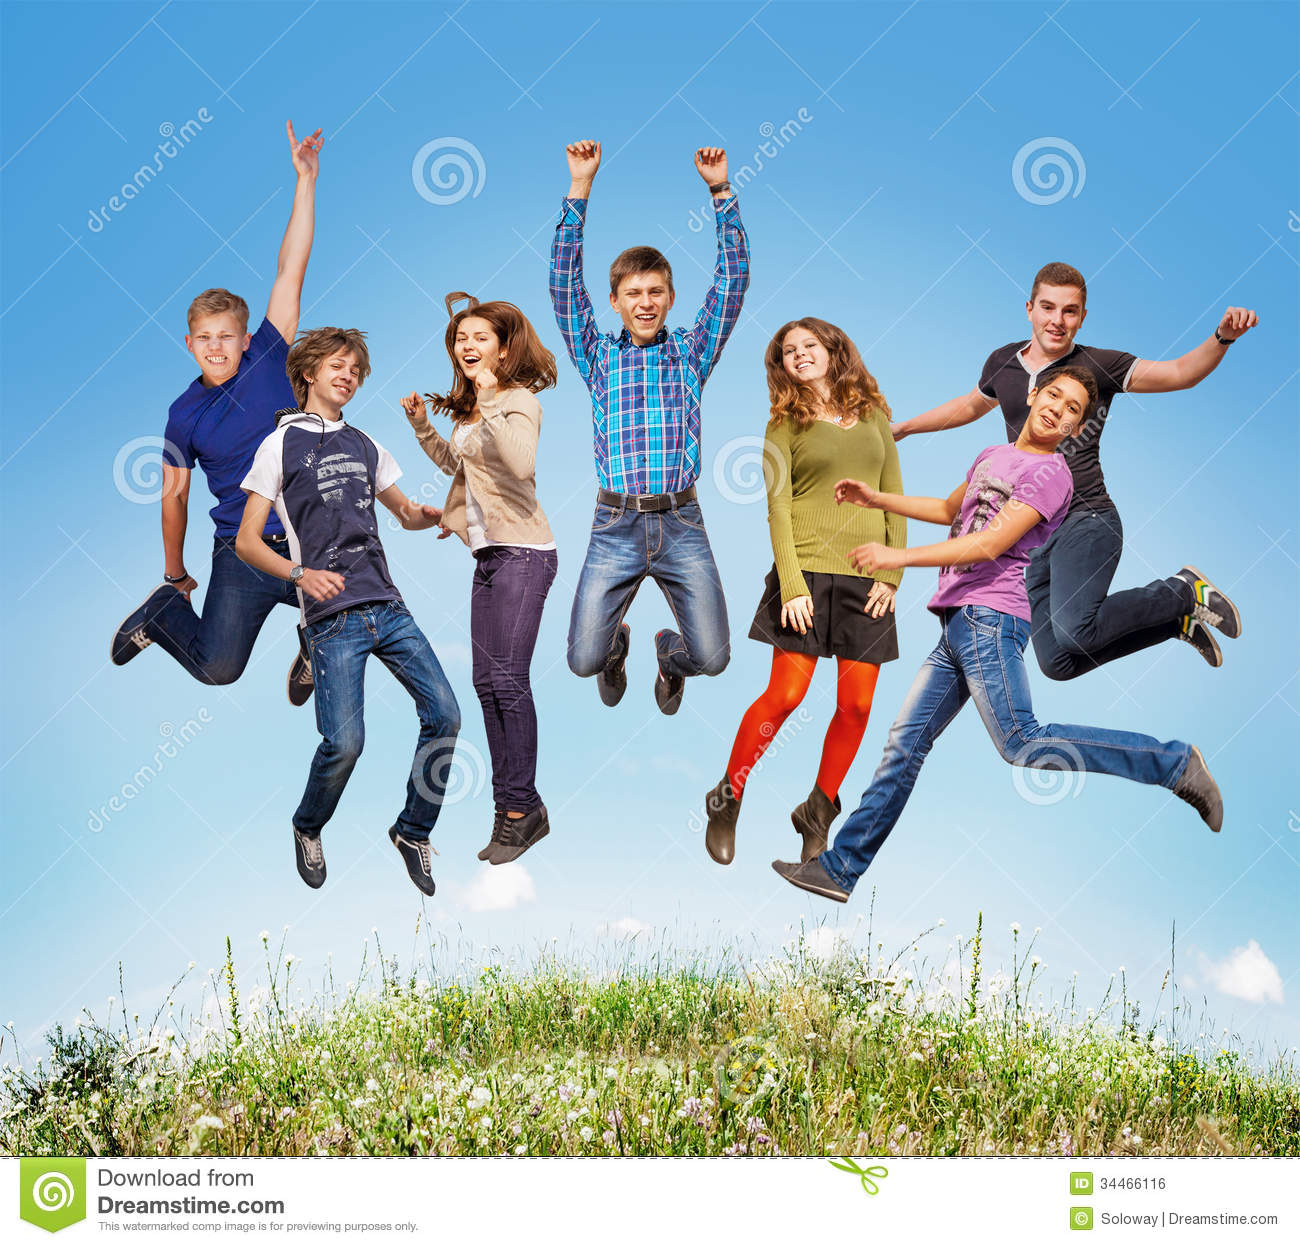 Group Of Teens Jumping In The Blue Sky Above The Green Grass